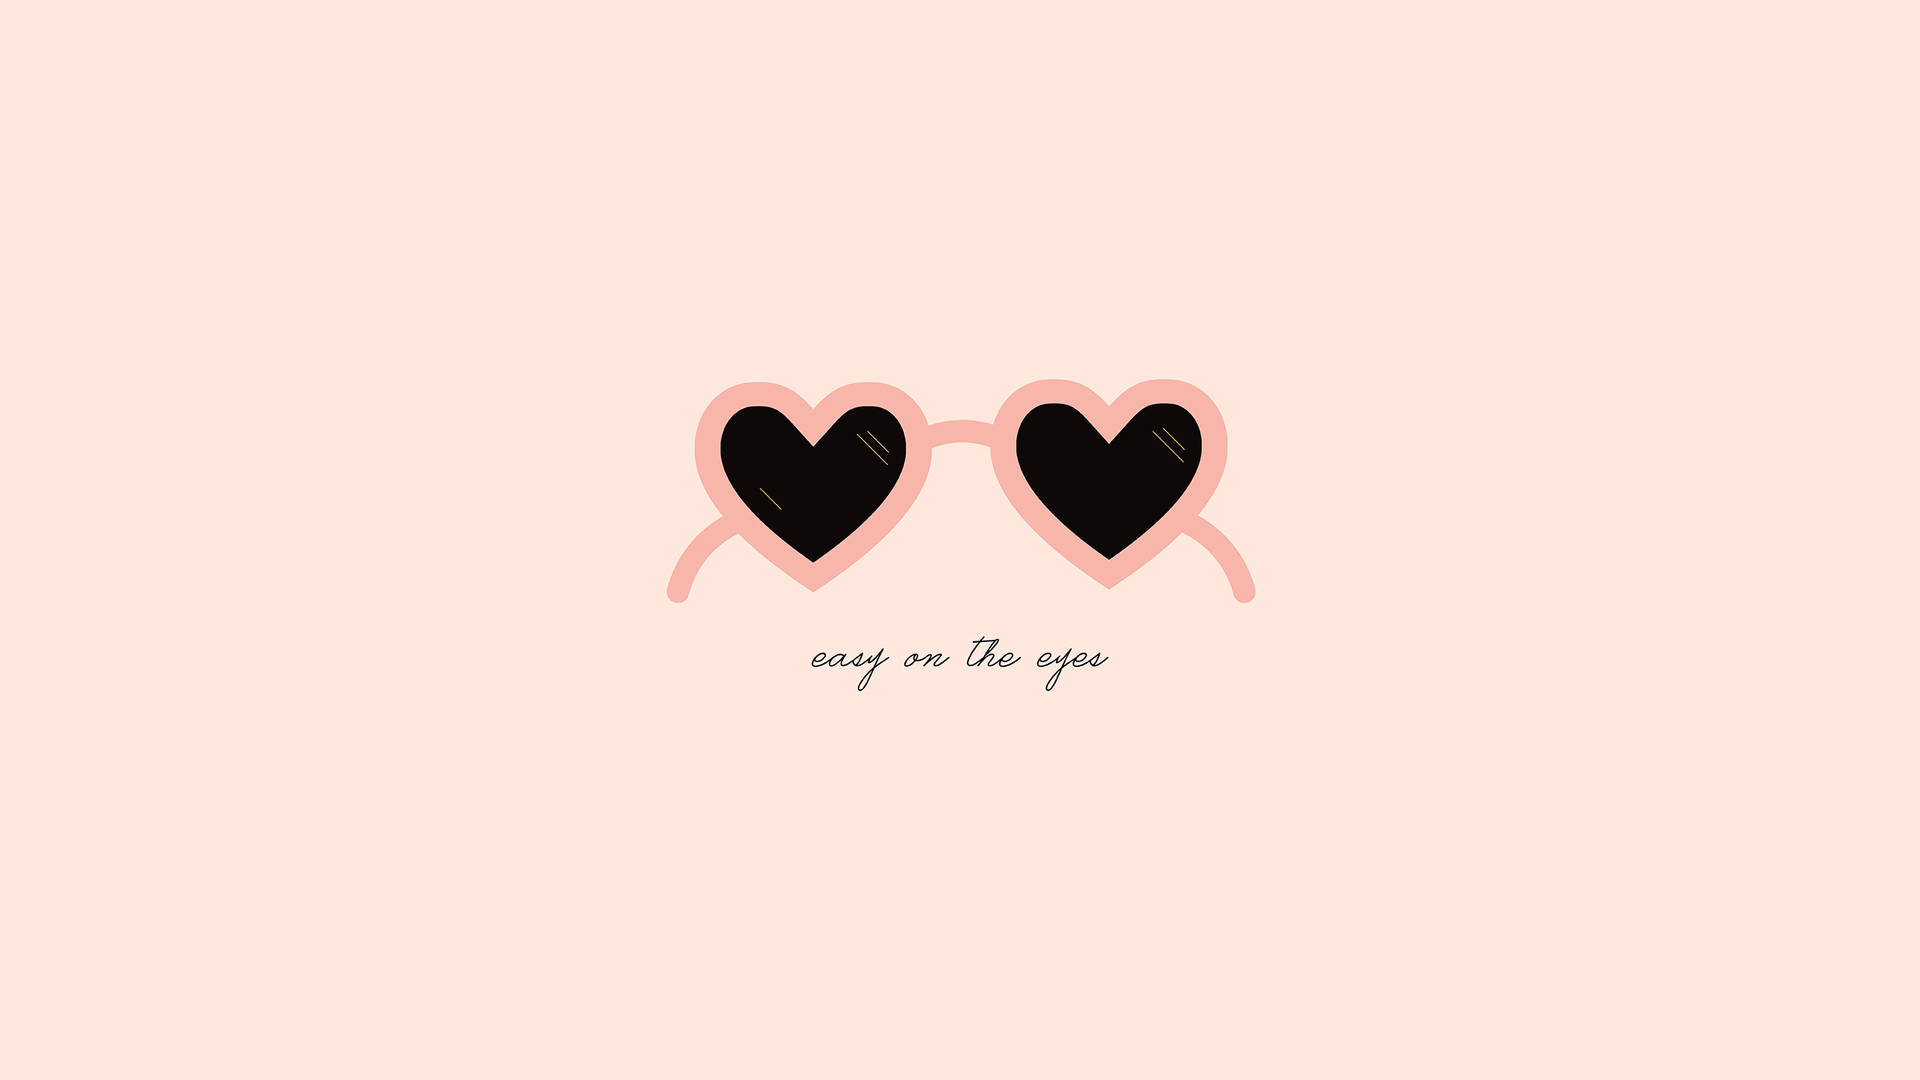 Free Downloadable Tech Backgrounds for February 2022  The Everygirl